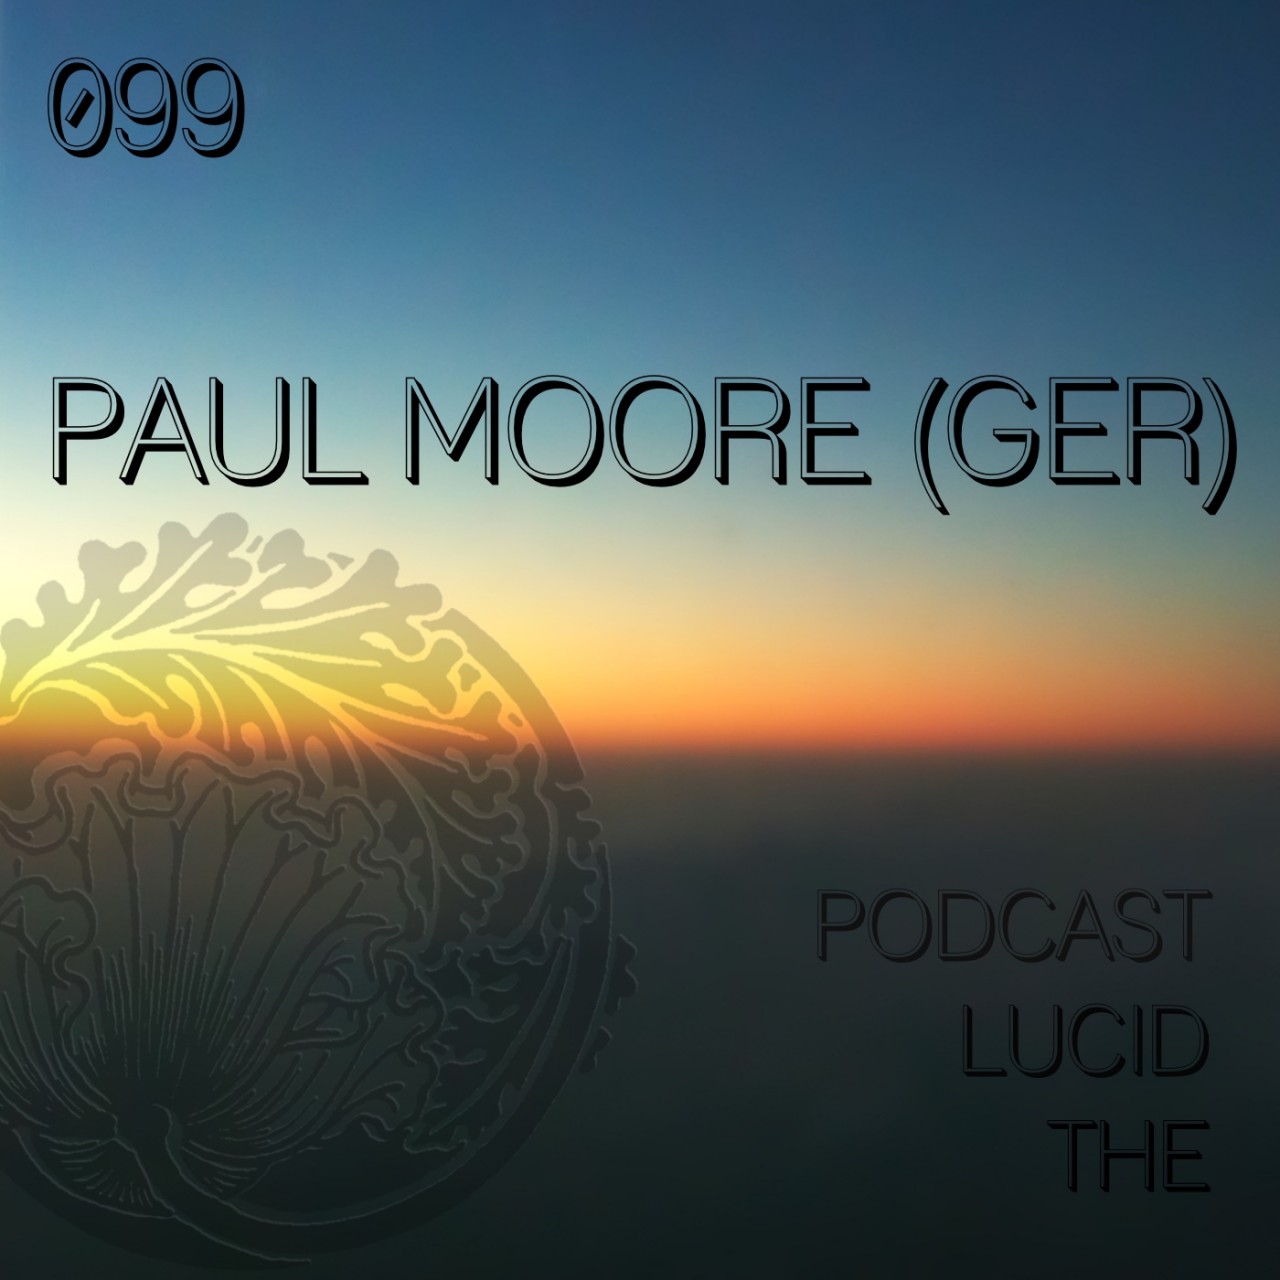 The Lucid Podcast 099 Paul Moore (GER)